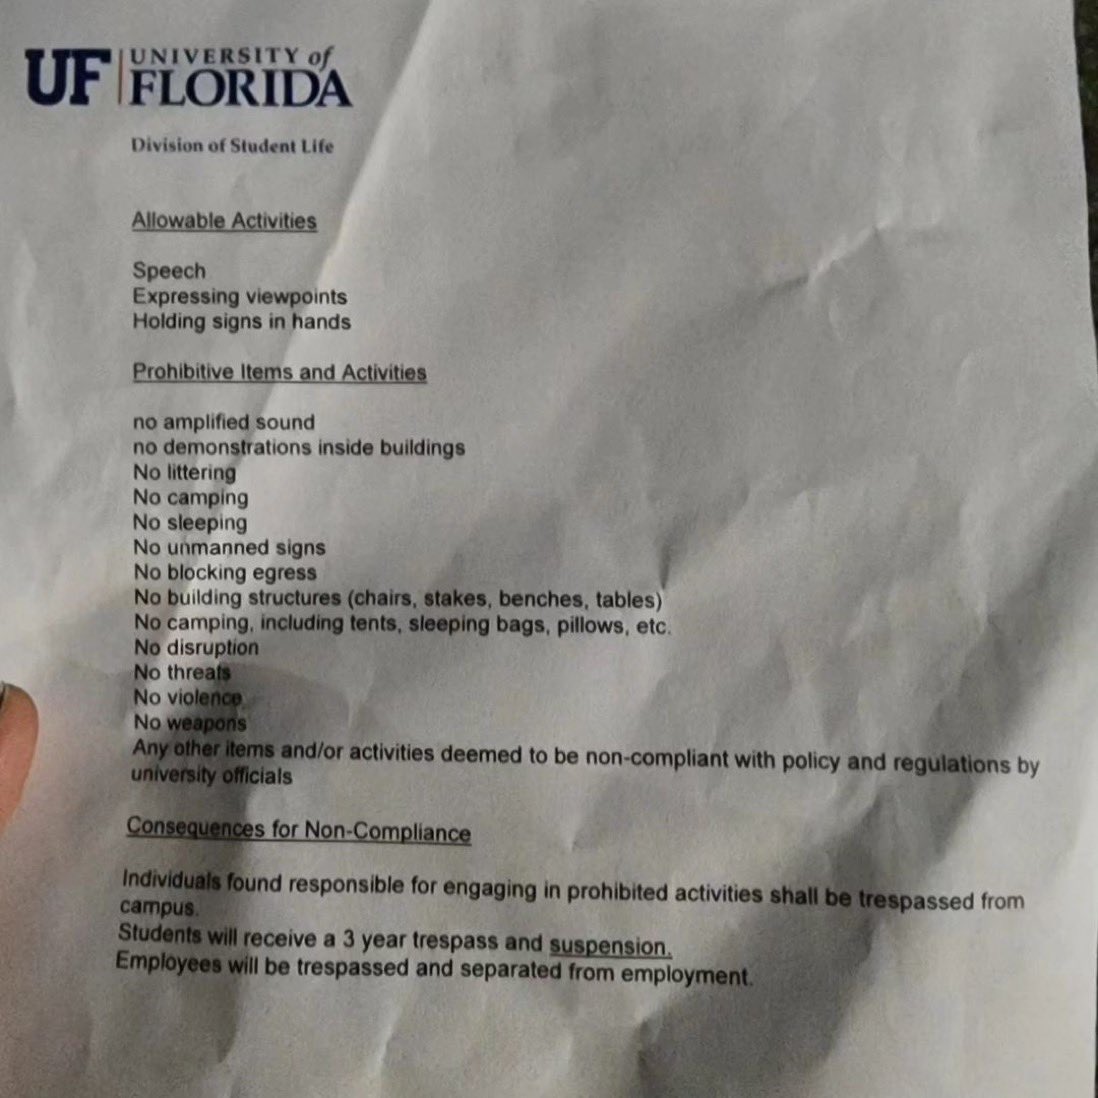 The University of Florida is clear on what’s allowed and what isn’t at their campus. 

✔️ Free speech and holding signs are fine

❌ Camping put, taking over buildings, littering, posting signs, amplifying sounds, threats, violence are unacceptable

➡️ Students who violate the…